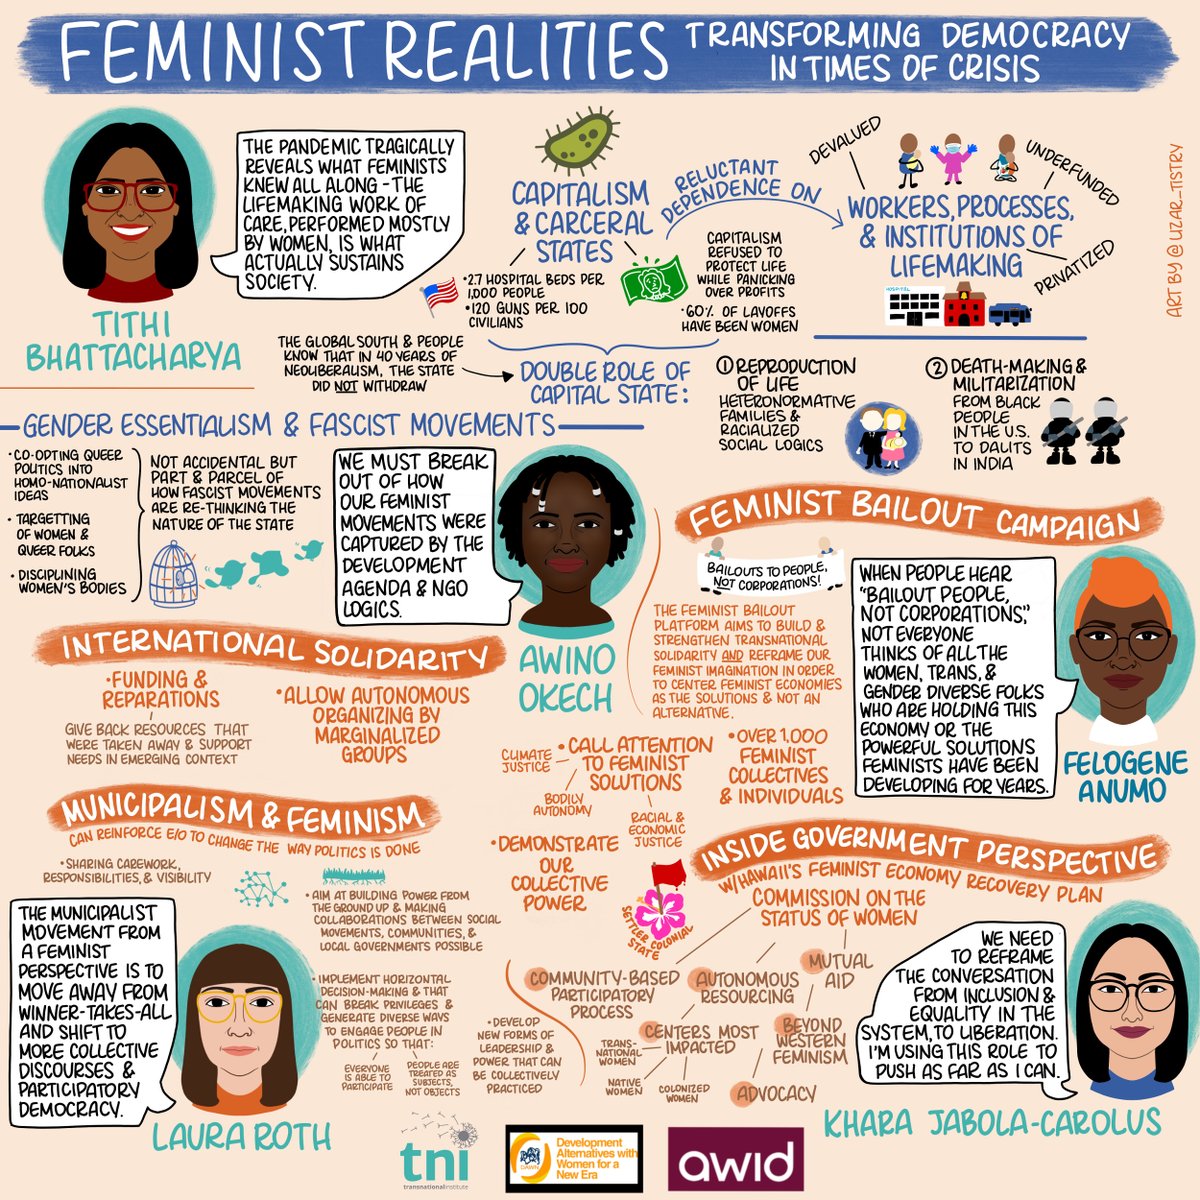 7. Feminism – Women are underpaid and at risk, have been targeted by state authorities and abusive partners, domestic work is devalued. The women’s movement is building new inclusive power structures, and centring care and participation as the basis of social organisation.